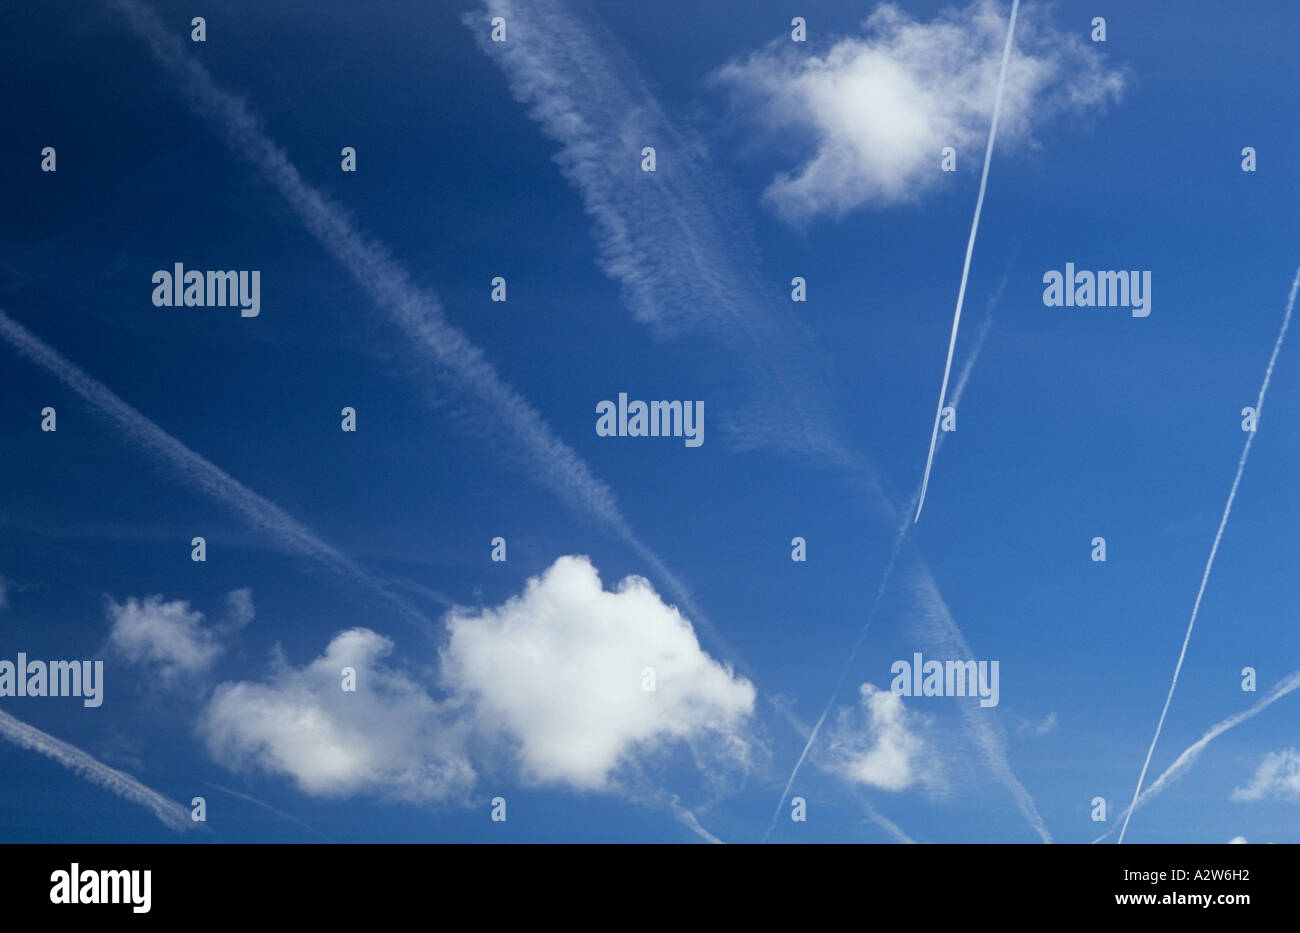 Blue sky crowded with vapour trails or contrails recent and current and with small cumulus clouds Stock Photo